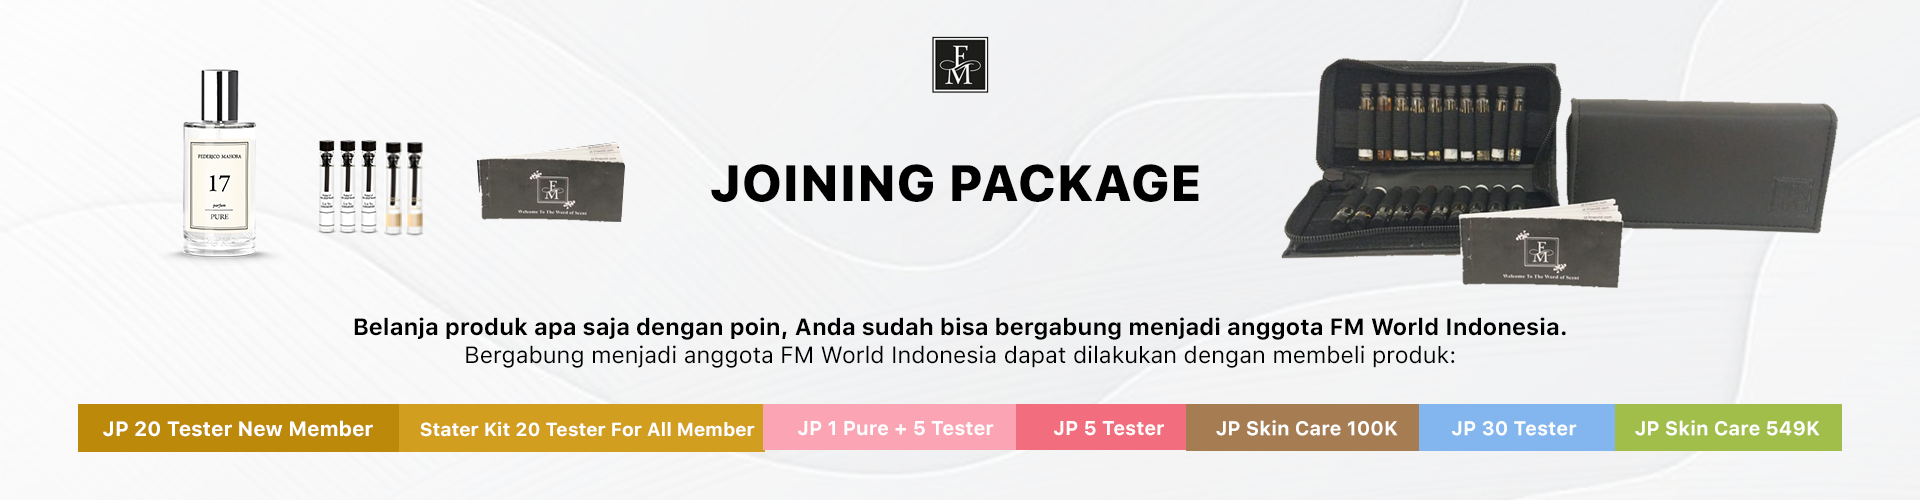 NEW JOINING PACKAGE [[ Agustus 2022 ]] 